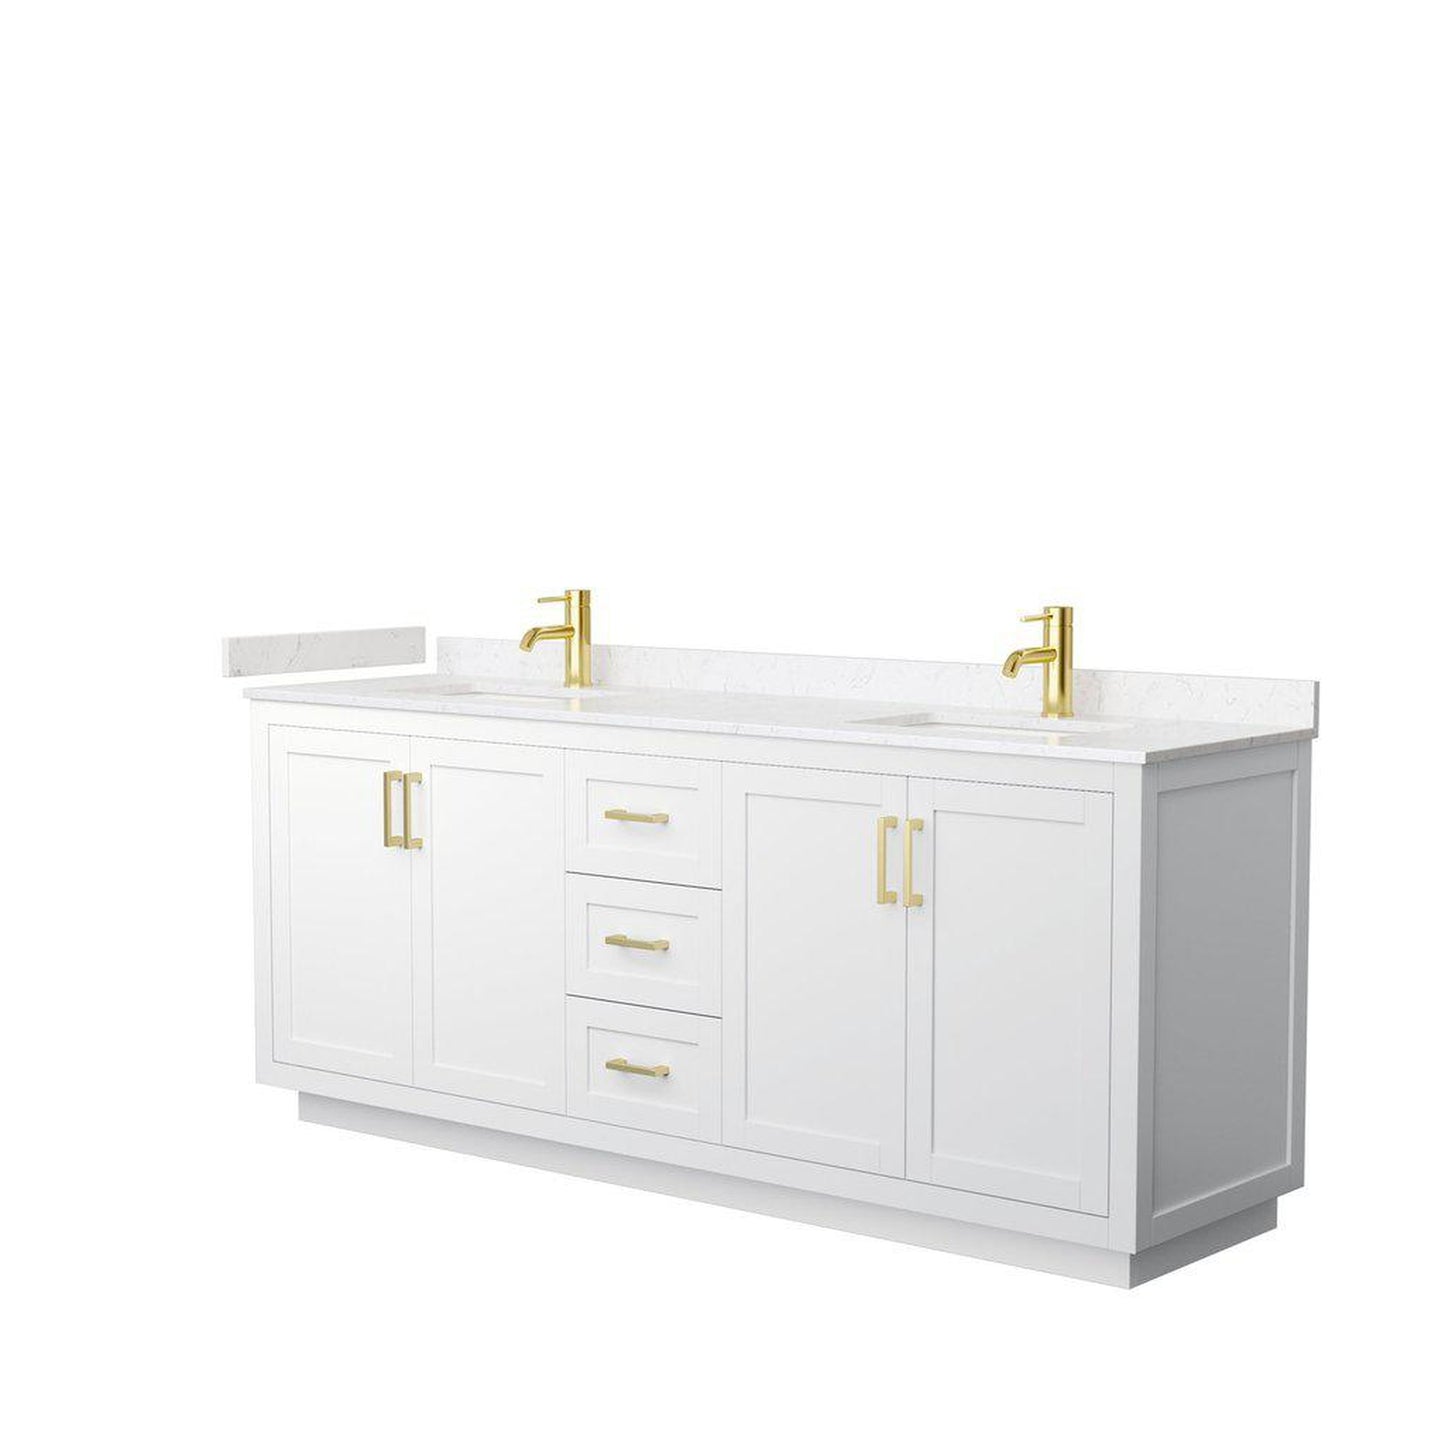 Wyndham Collection Miranda 80" Double Bathroom White Vanity Set With Light-Vein Carrara Cultured Marble Countertop, Undermount Square Sink, And Brushed Gold Trim